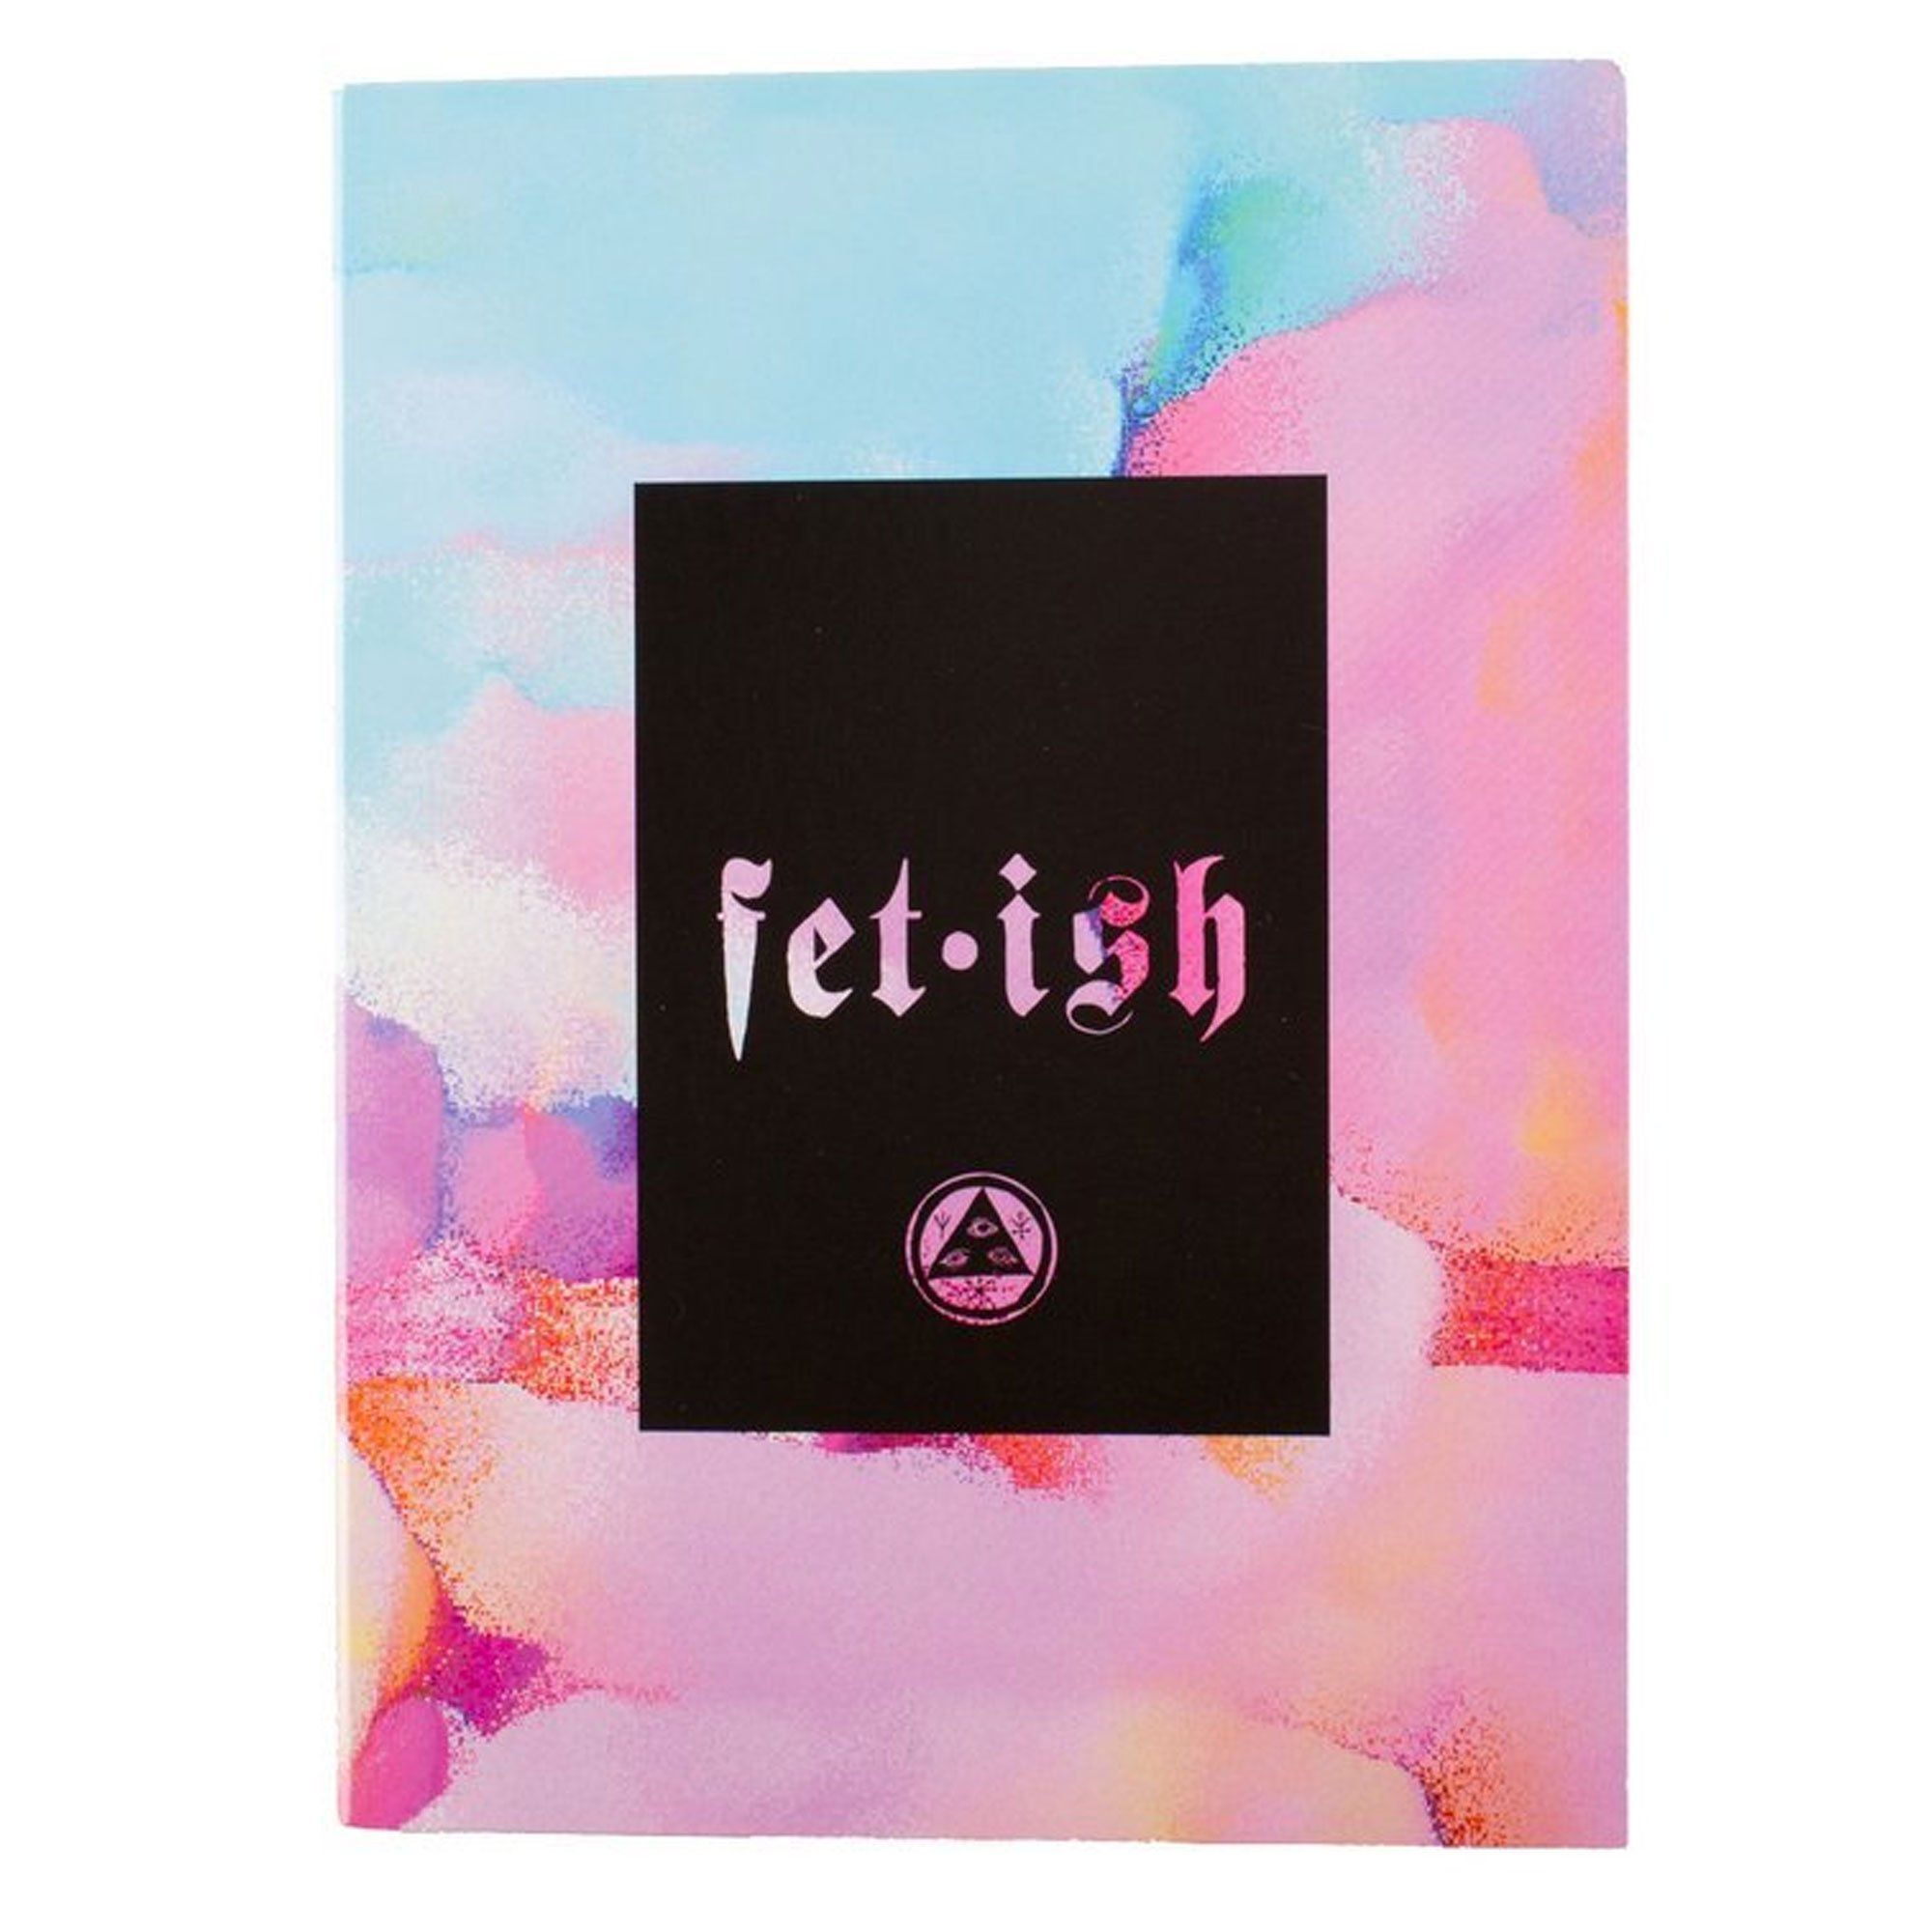 Buy fetish dvd in the uk picture